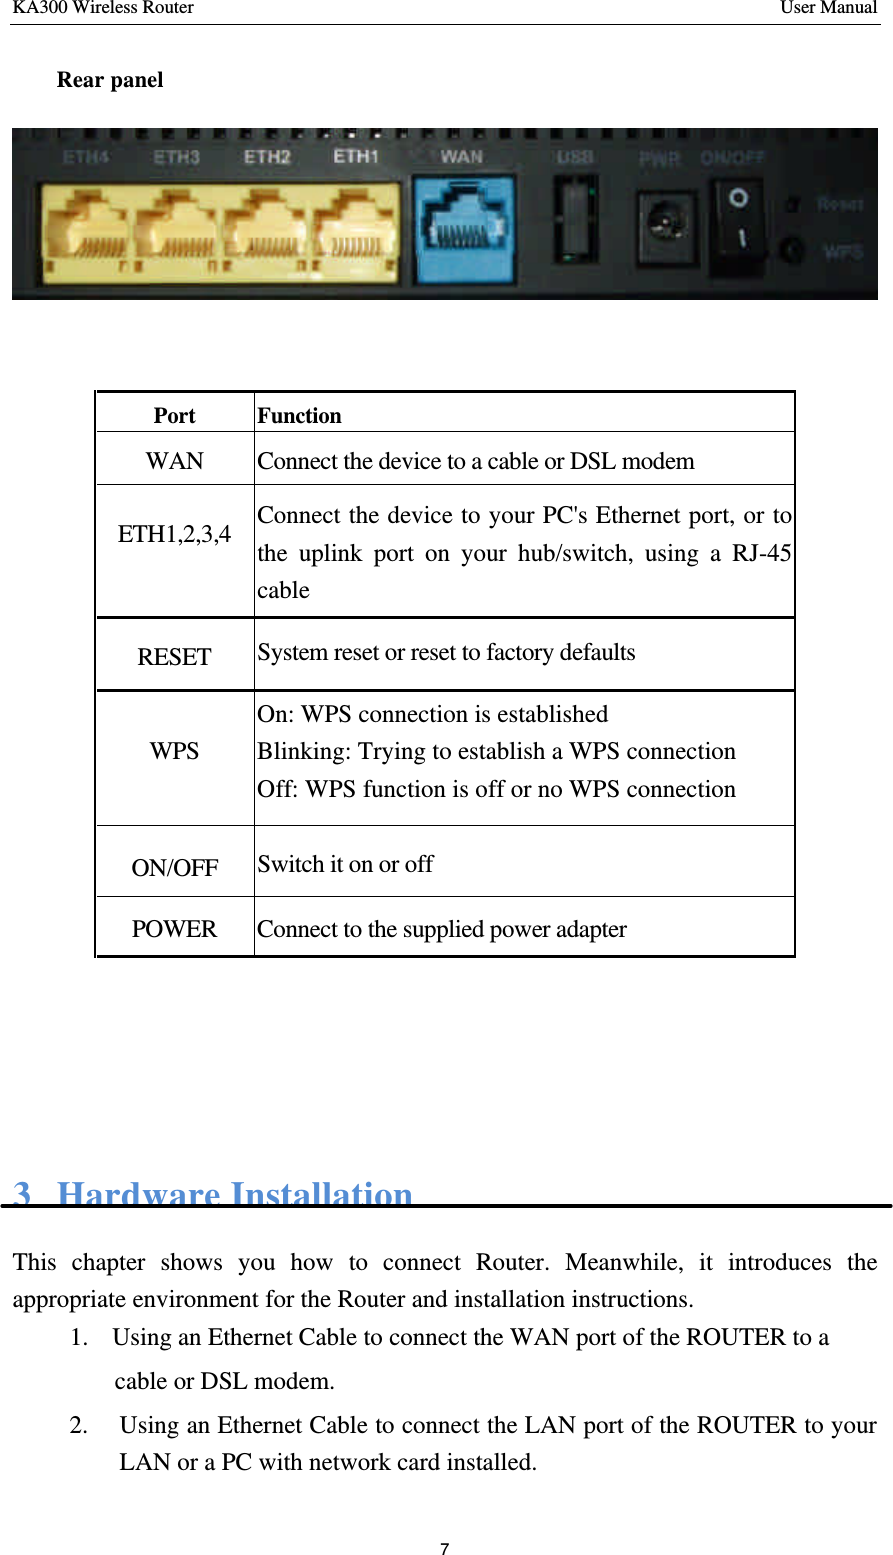 KA300 Wireless Router       User Manual 7  Rear panel                3 Hardware Installation This chapter shows you how to connect Router. Meanwhile, it introduces the appropriate environment for the Router and installation instructions.   1.  Using an Ethernet Cable to connect the WAN port of the ROUTER to a   cable or DSL modem.   2.  Using an Ethernet Cable to connect the LAN port of the ROUTER to your LAN or a PC with network card installed. Port Function WAN Connect the device to a cable or DSL modem ETH1,2,3,4  Connect the device to your PC&apos;s Ethernet port, or to the uplink port on your hub/switch, using a RJ-45 cable RESET System reset or reset to factory defaults      WPS On: WPS connection is established Blinking: Trying to establish a WPS connection Off: WPS function is off or no WPS connection ON/OFF Switch it on or off POWER Connect to the supplied power adapter   